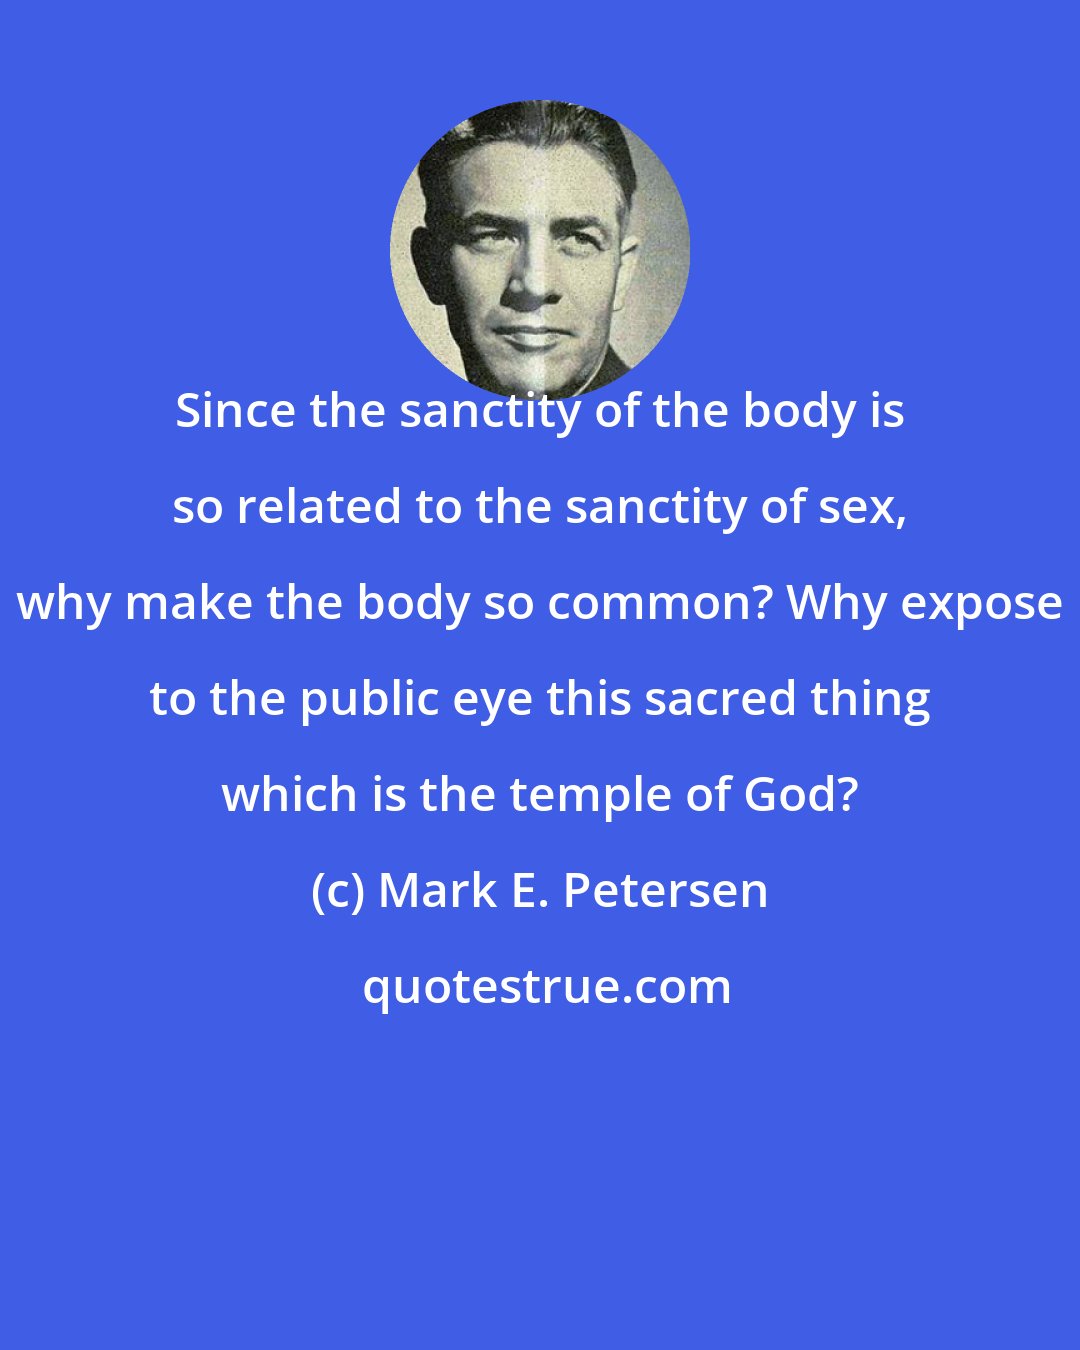 Mark E. Petersen: Since the sanctity of the body is so related to the sanctity of sex, why make the body so common? Why expose to the public eye this sacred thing which is the temple of God?